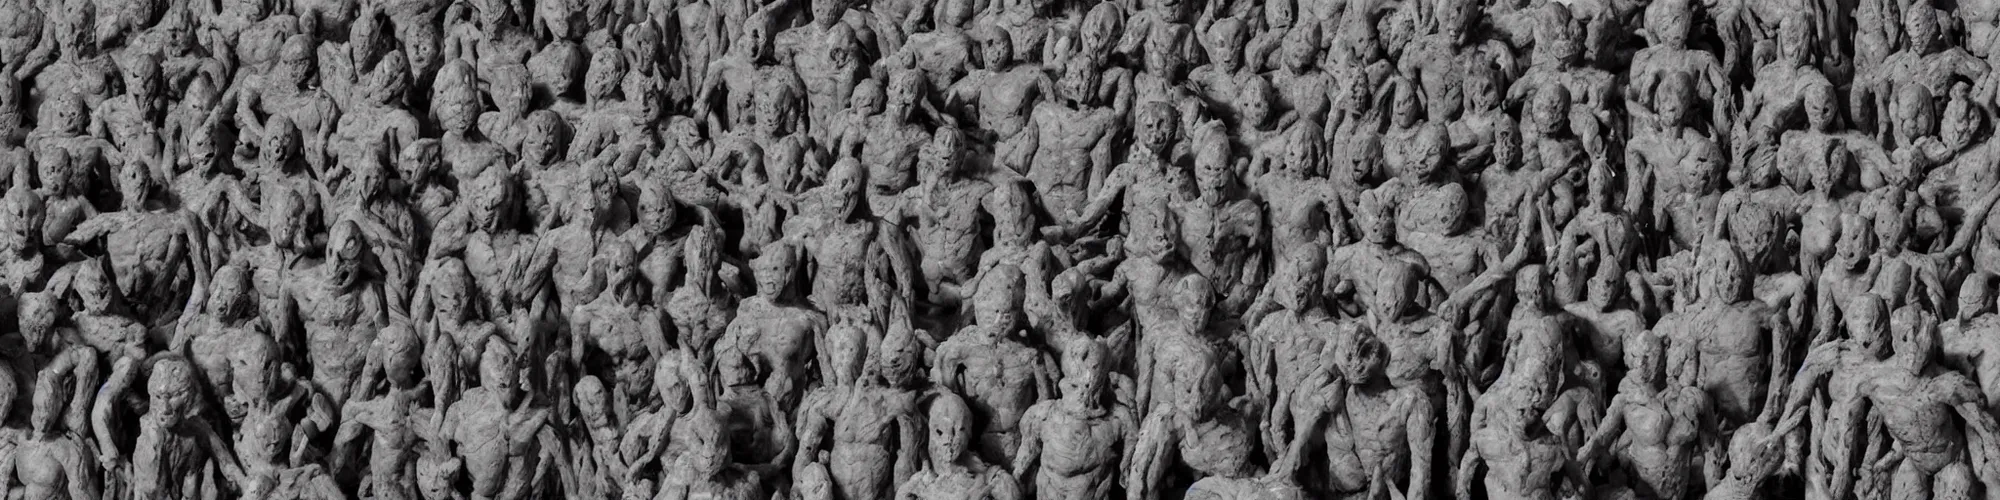 Image similar to hundreds of humans. A sea of humans. interconnected flesh. Melting clay golem humans. Dungeons&Dragons: Lemure. Lemure creature. Demonic scene. Many humans intertwined and woven together. Bodies and forms amesh. Extremely unsettling artwork. Clay sculpture by Alberto Giacometti.